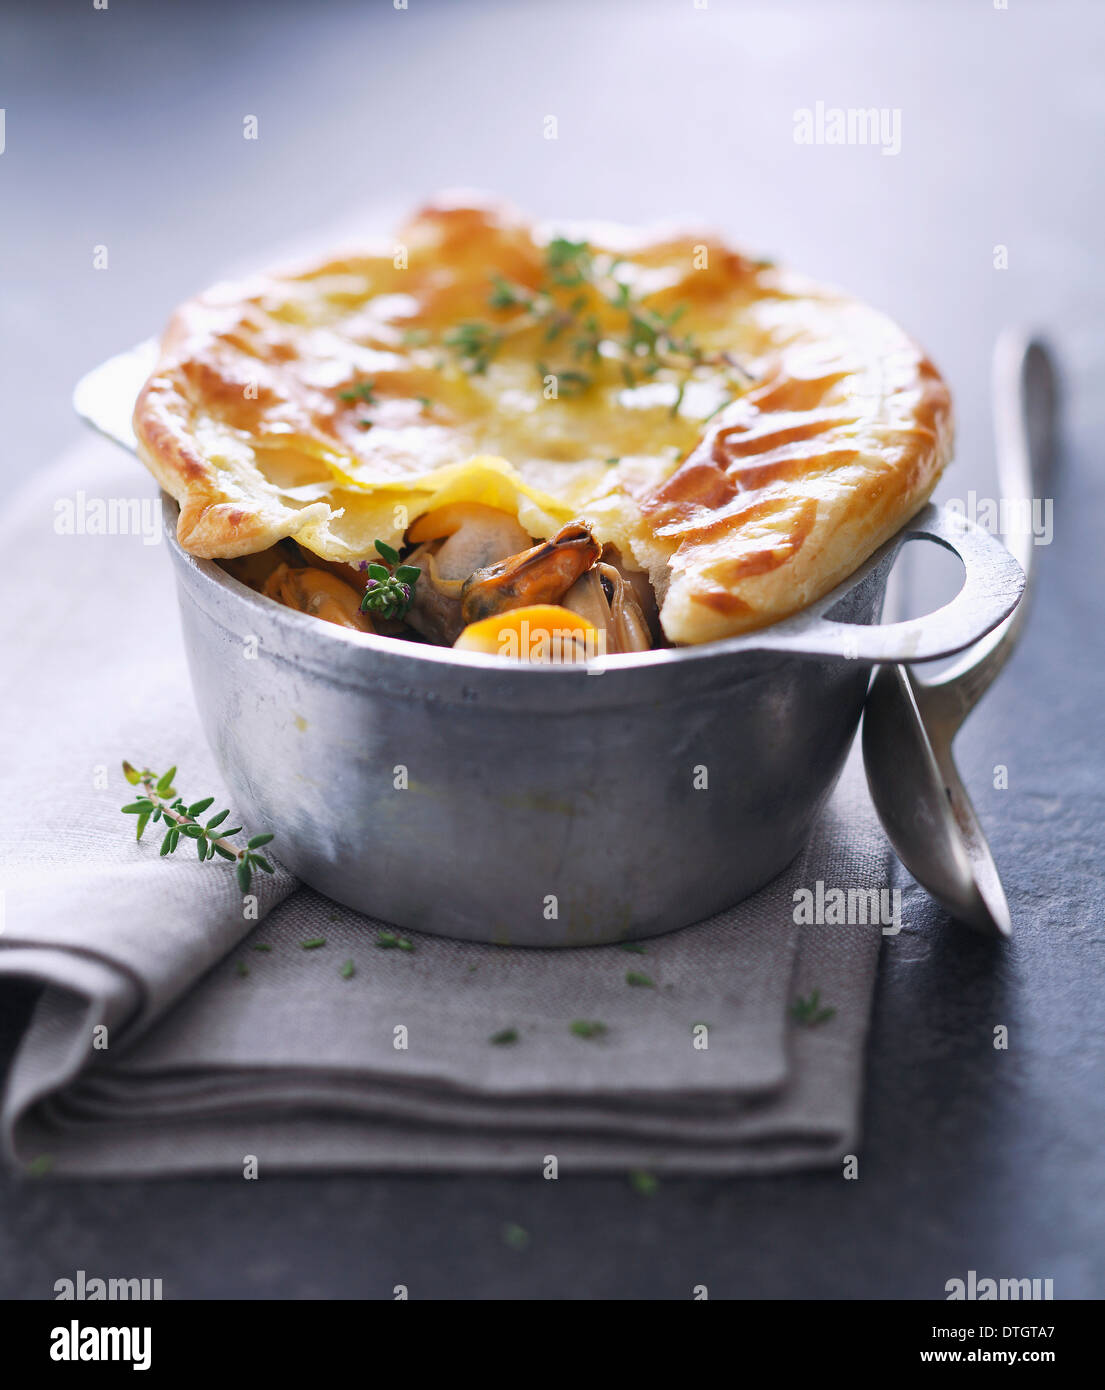 Seafood casserole sealed with pastry Stock Photo